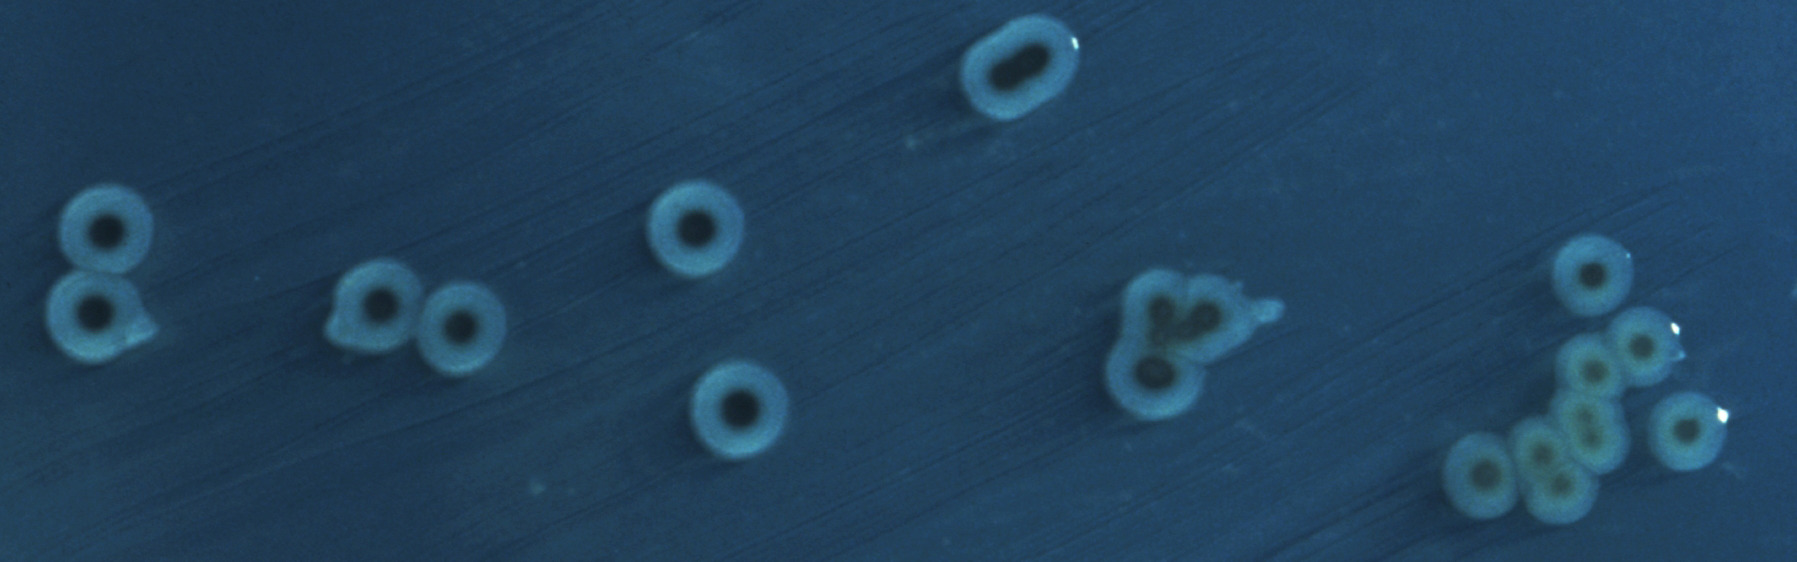 Colonies of pathogenic bacteria growing on an agar culture plate - Salmonella enterica